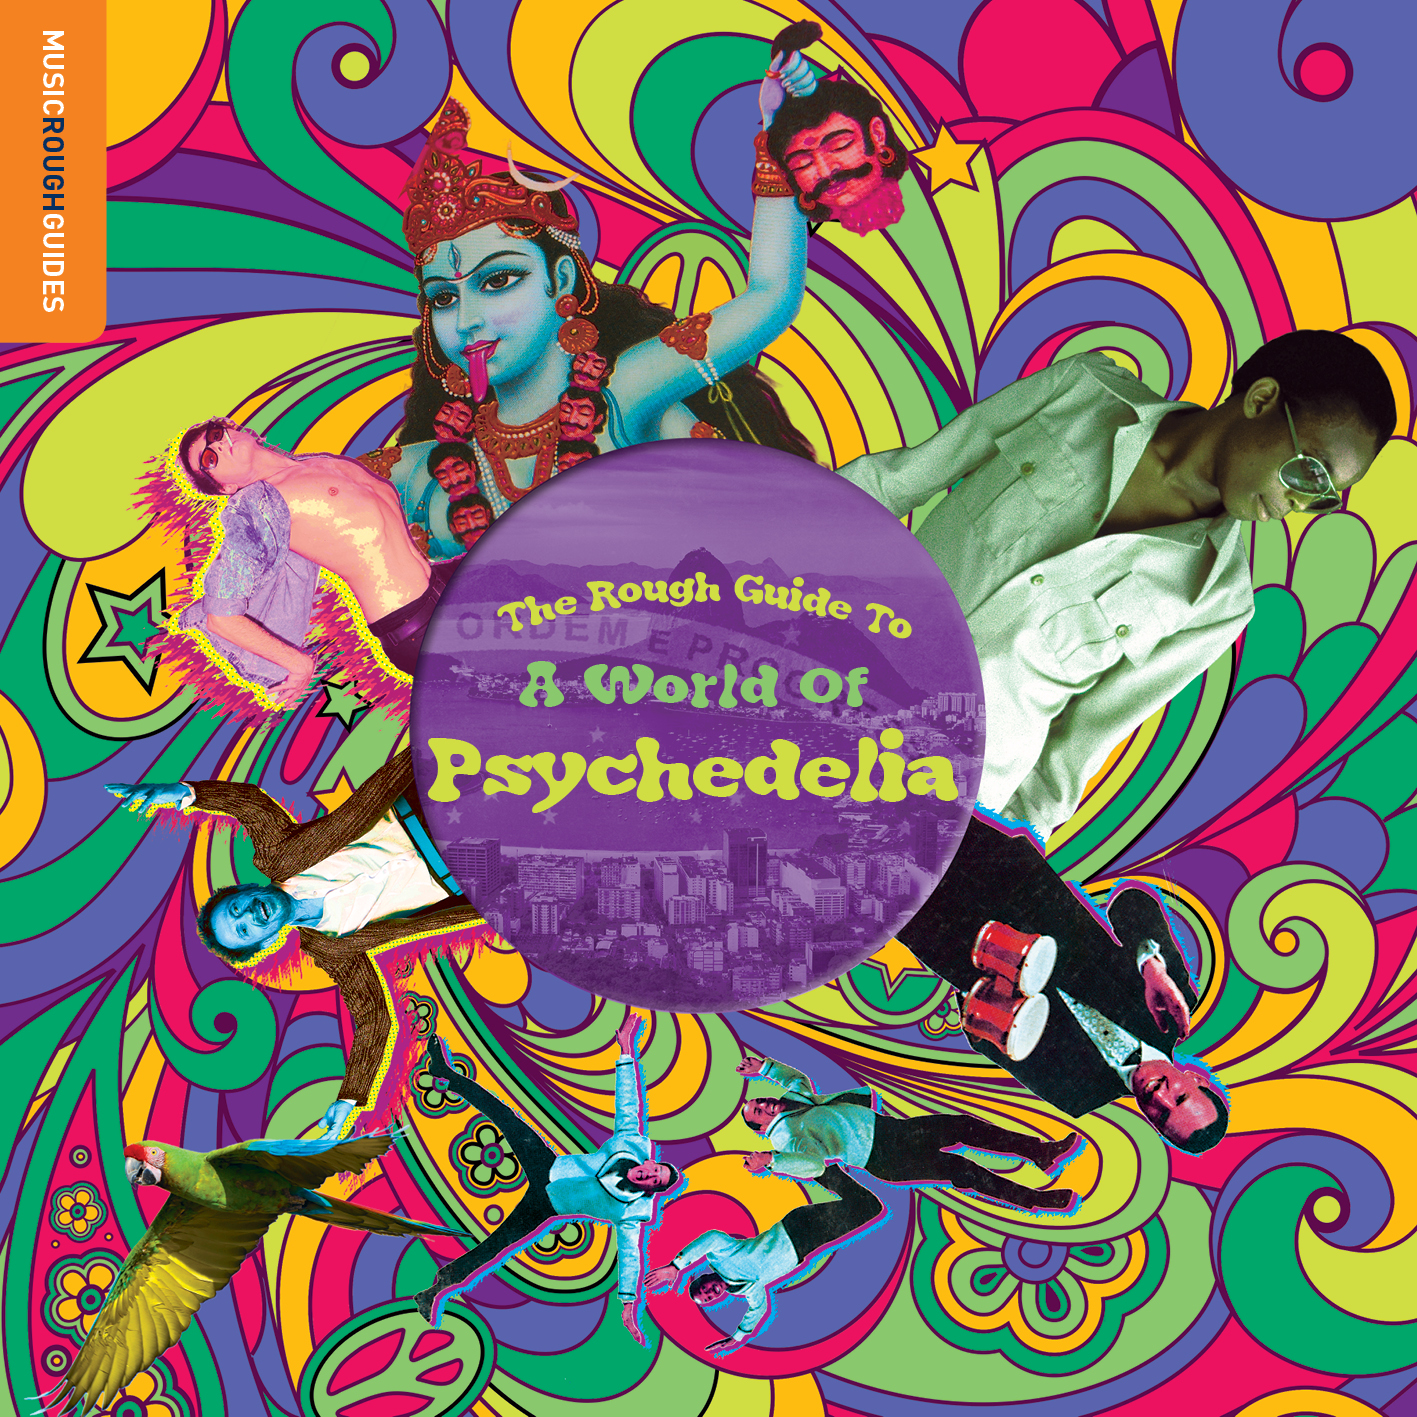 GLOBAL A GO-GO: The Rough Guide To A World Of Psychedelia